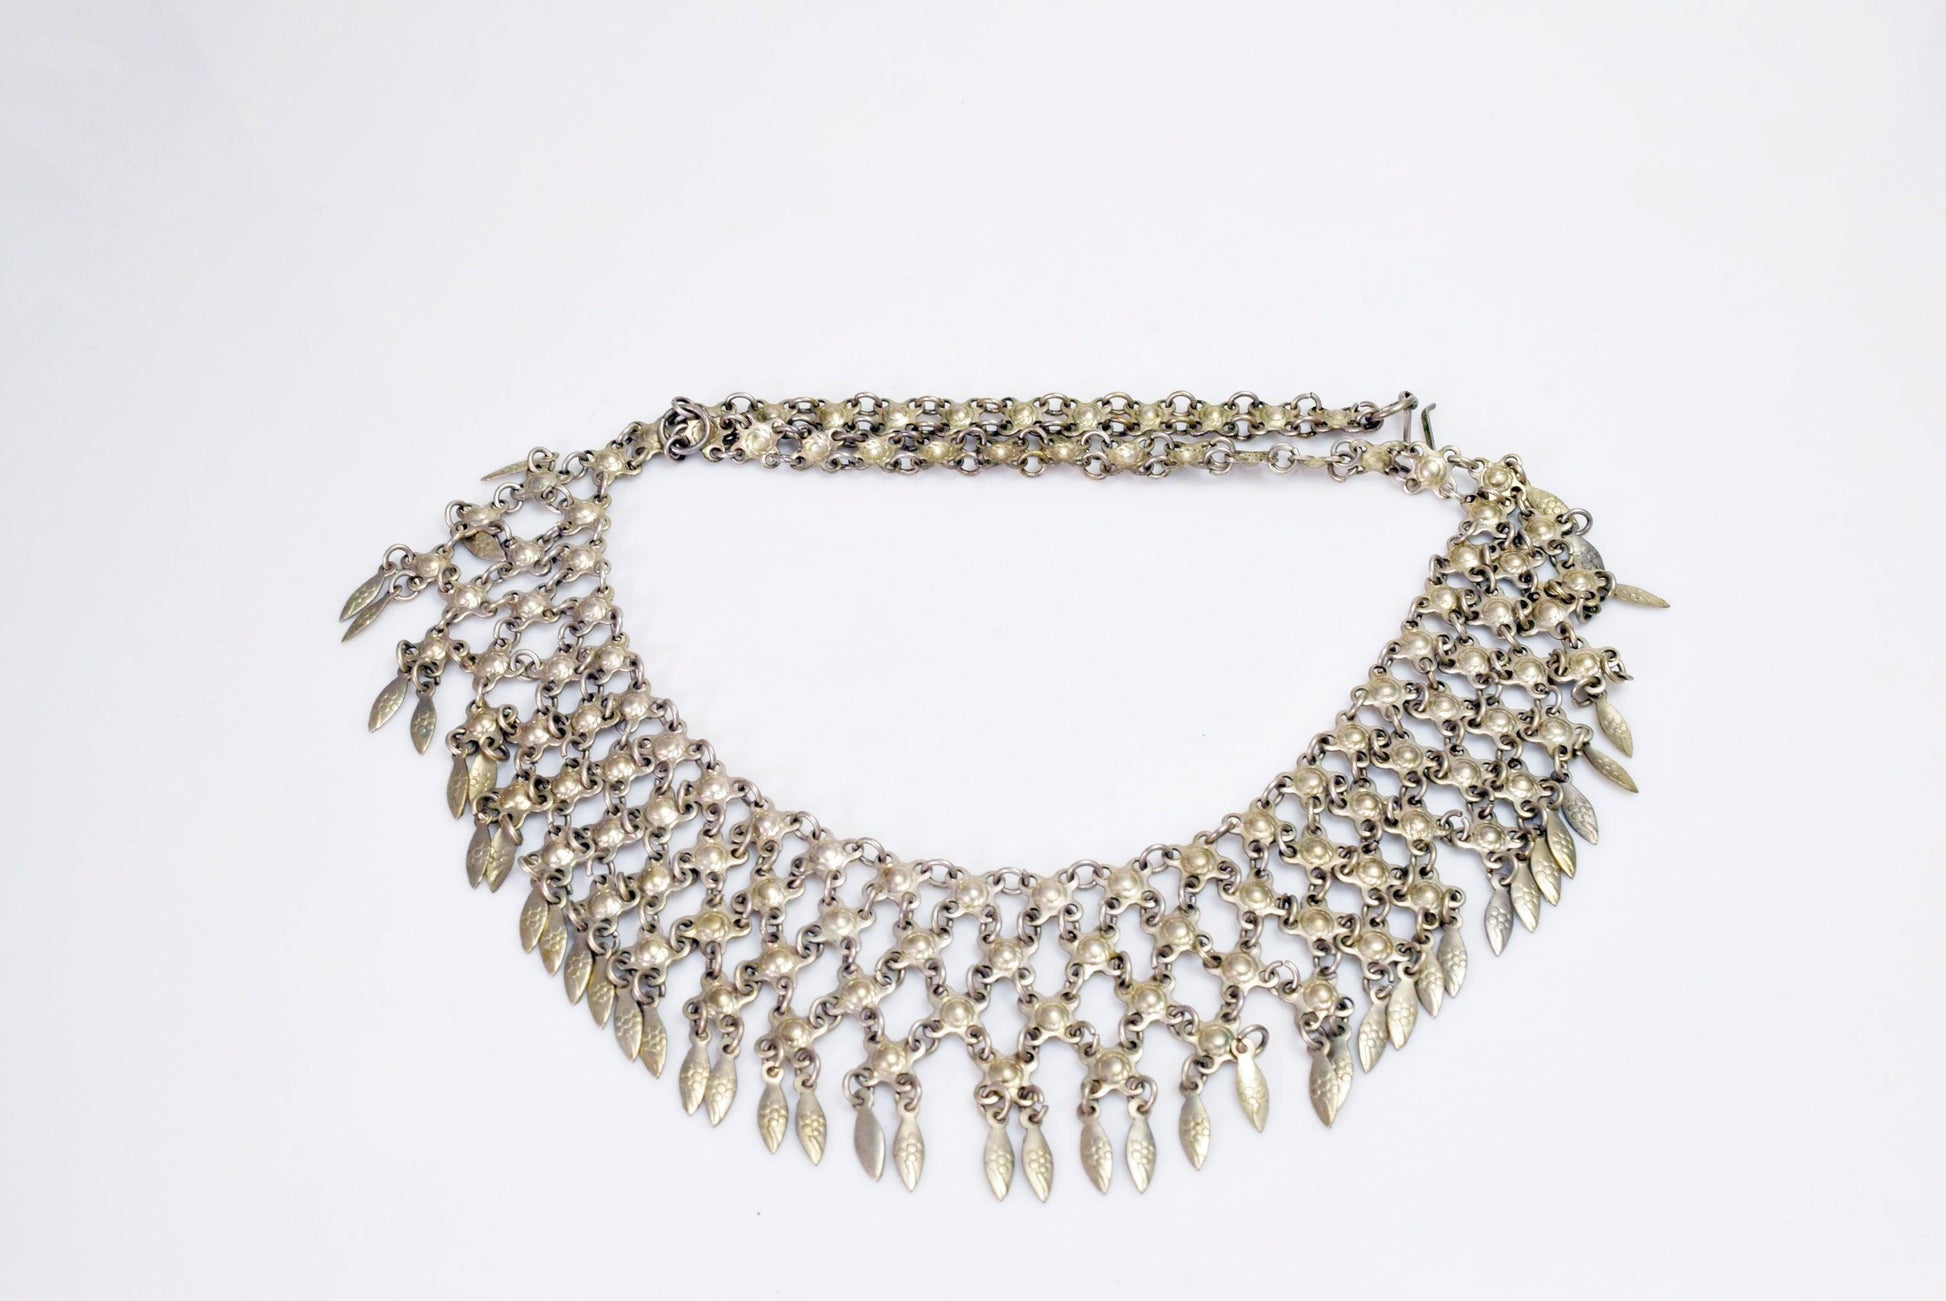 Middle East bib necklace